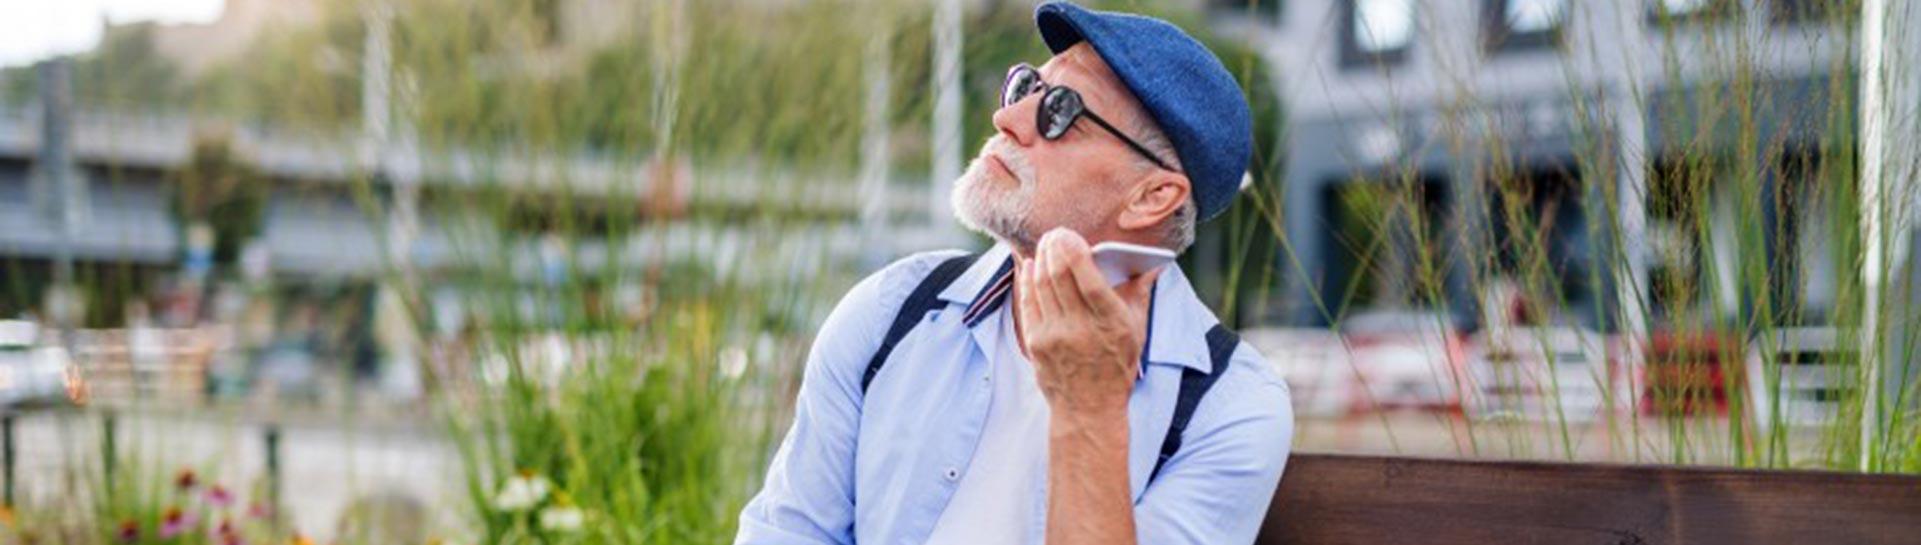 A vision impaired man uses a smartphone.